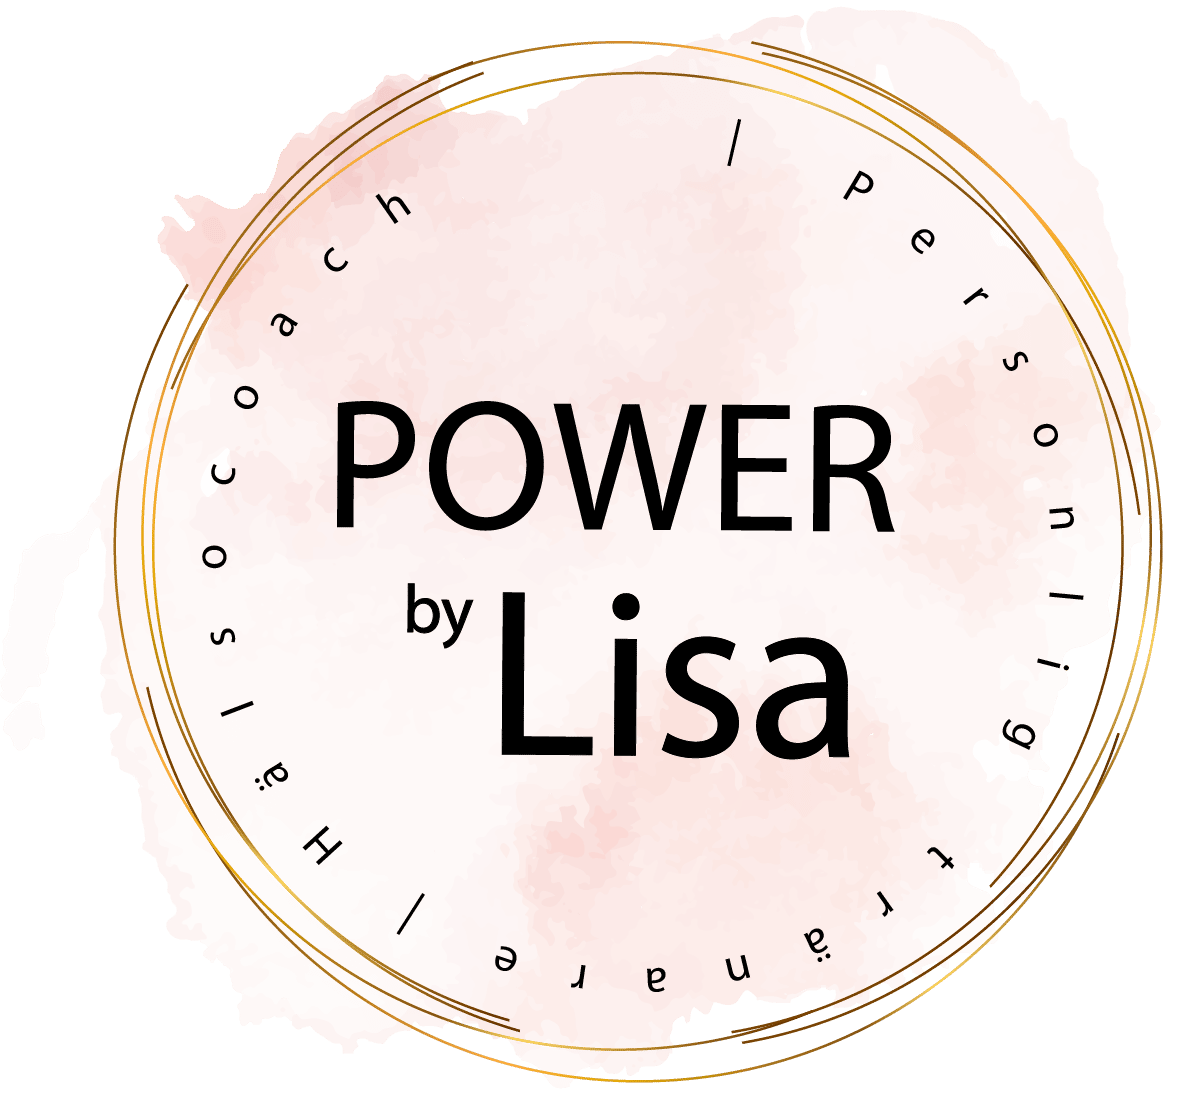 Kund Power by LIsa